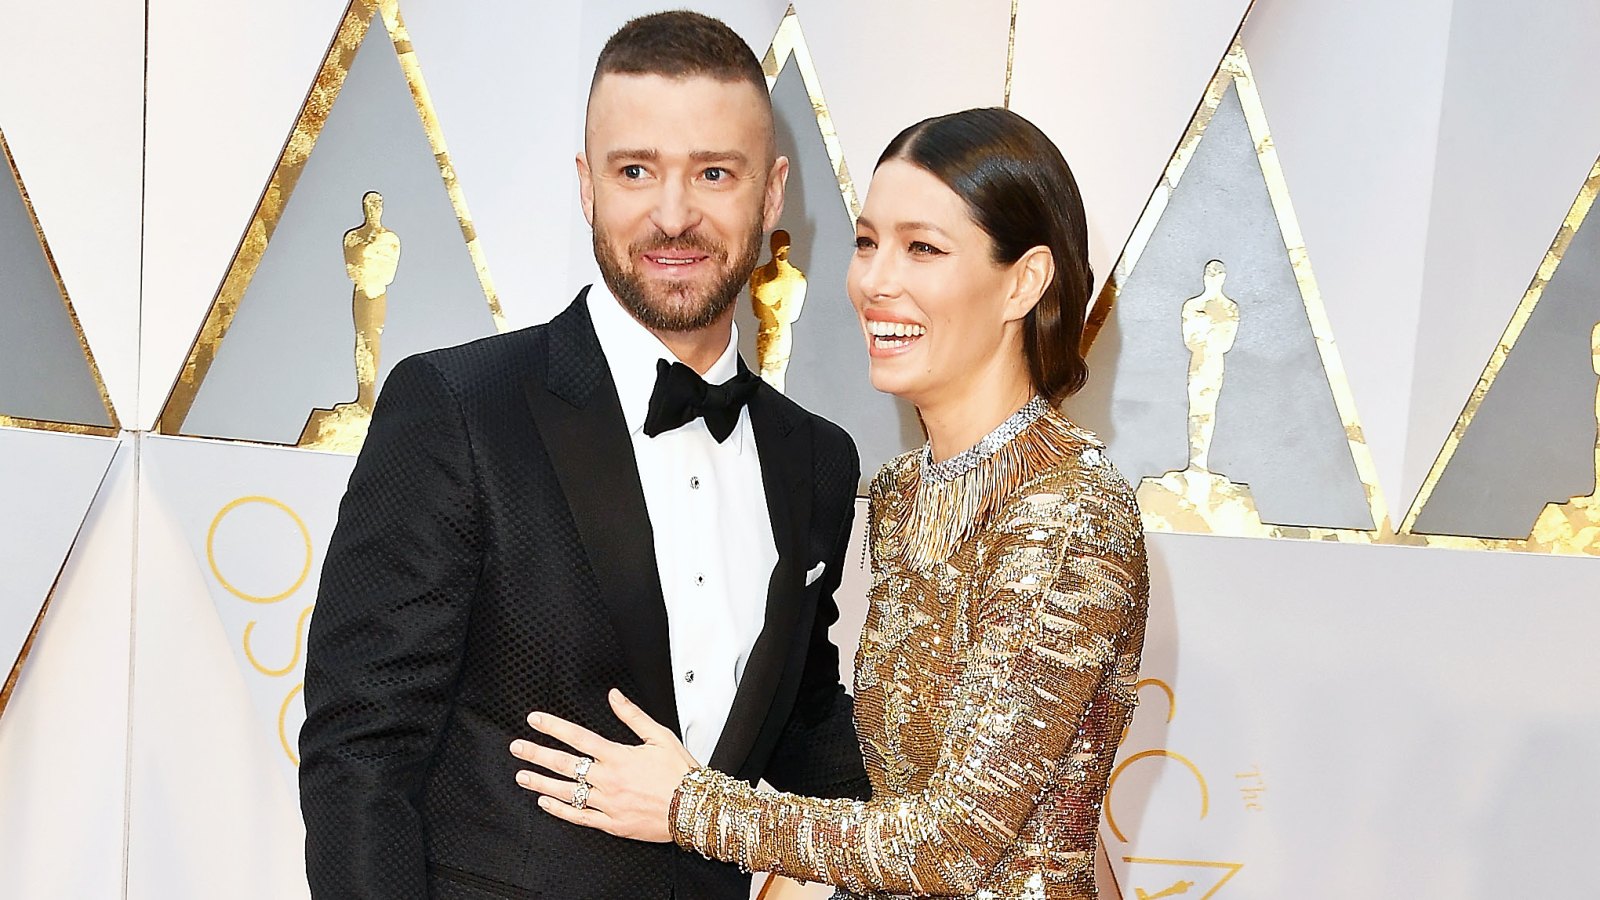 Jessica Biel Gushes Over Justin Timberlake on First Night of Man of the Woods Tour